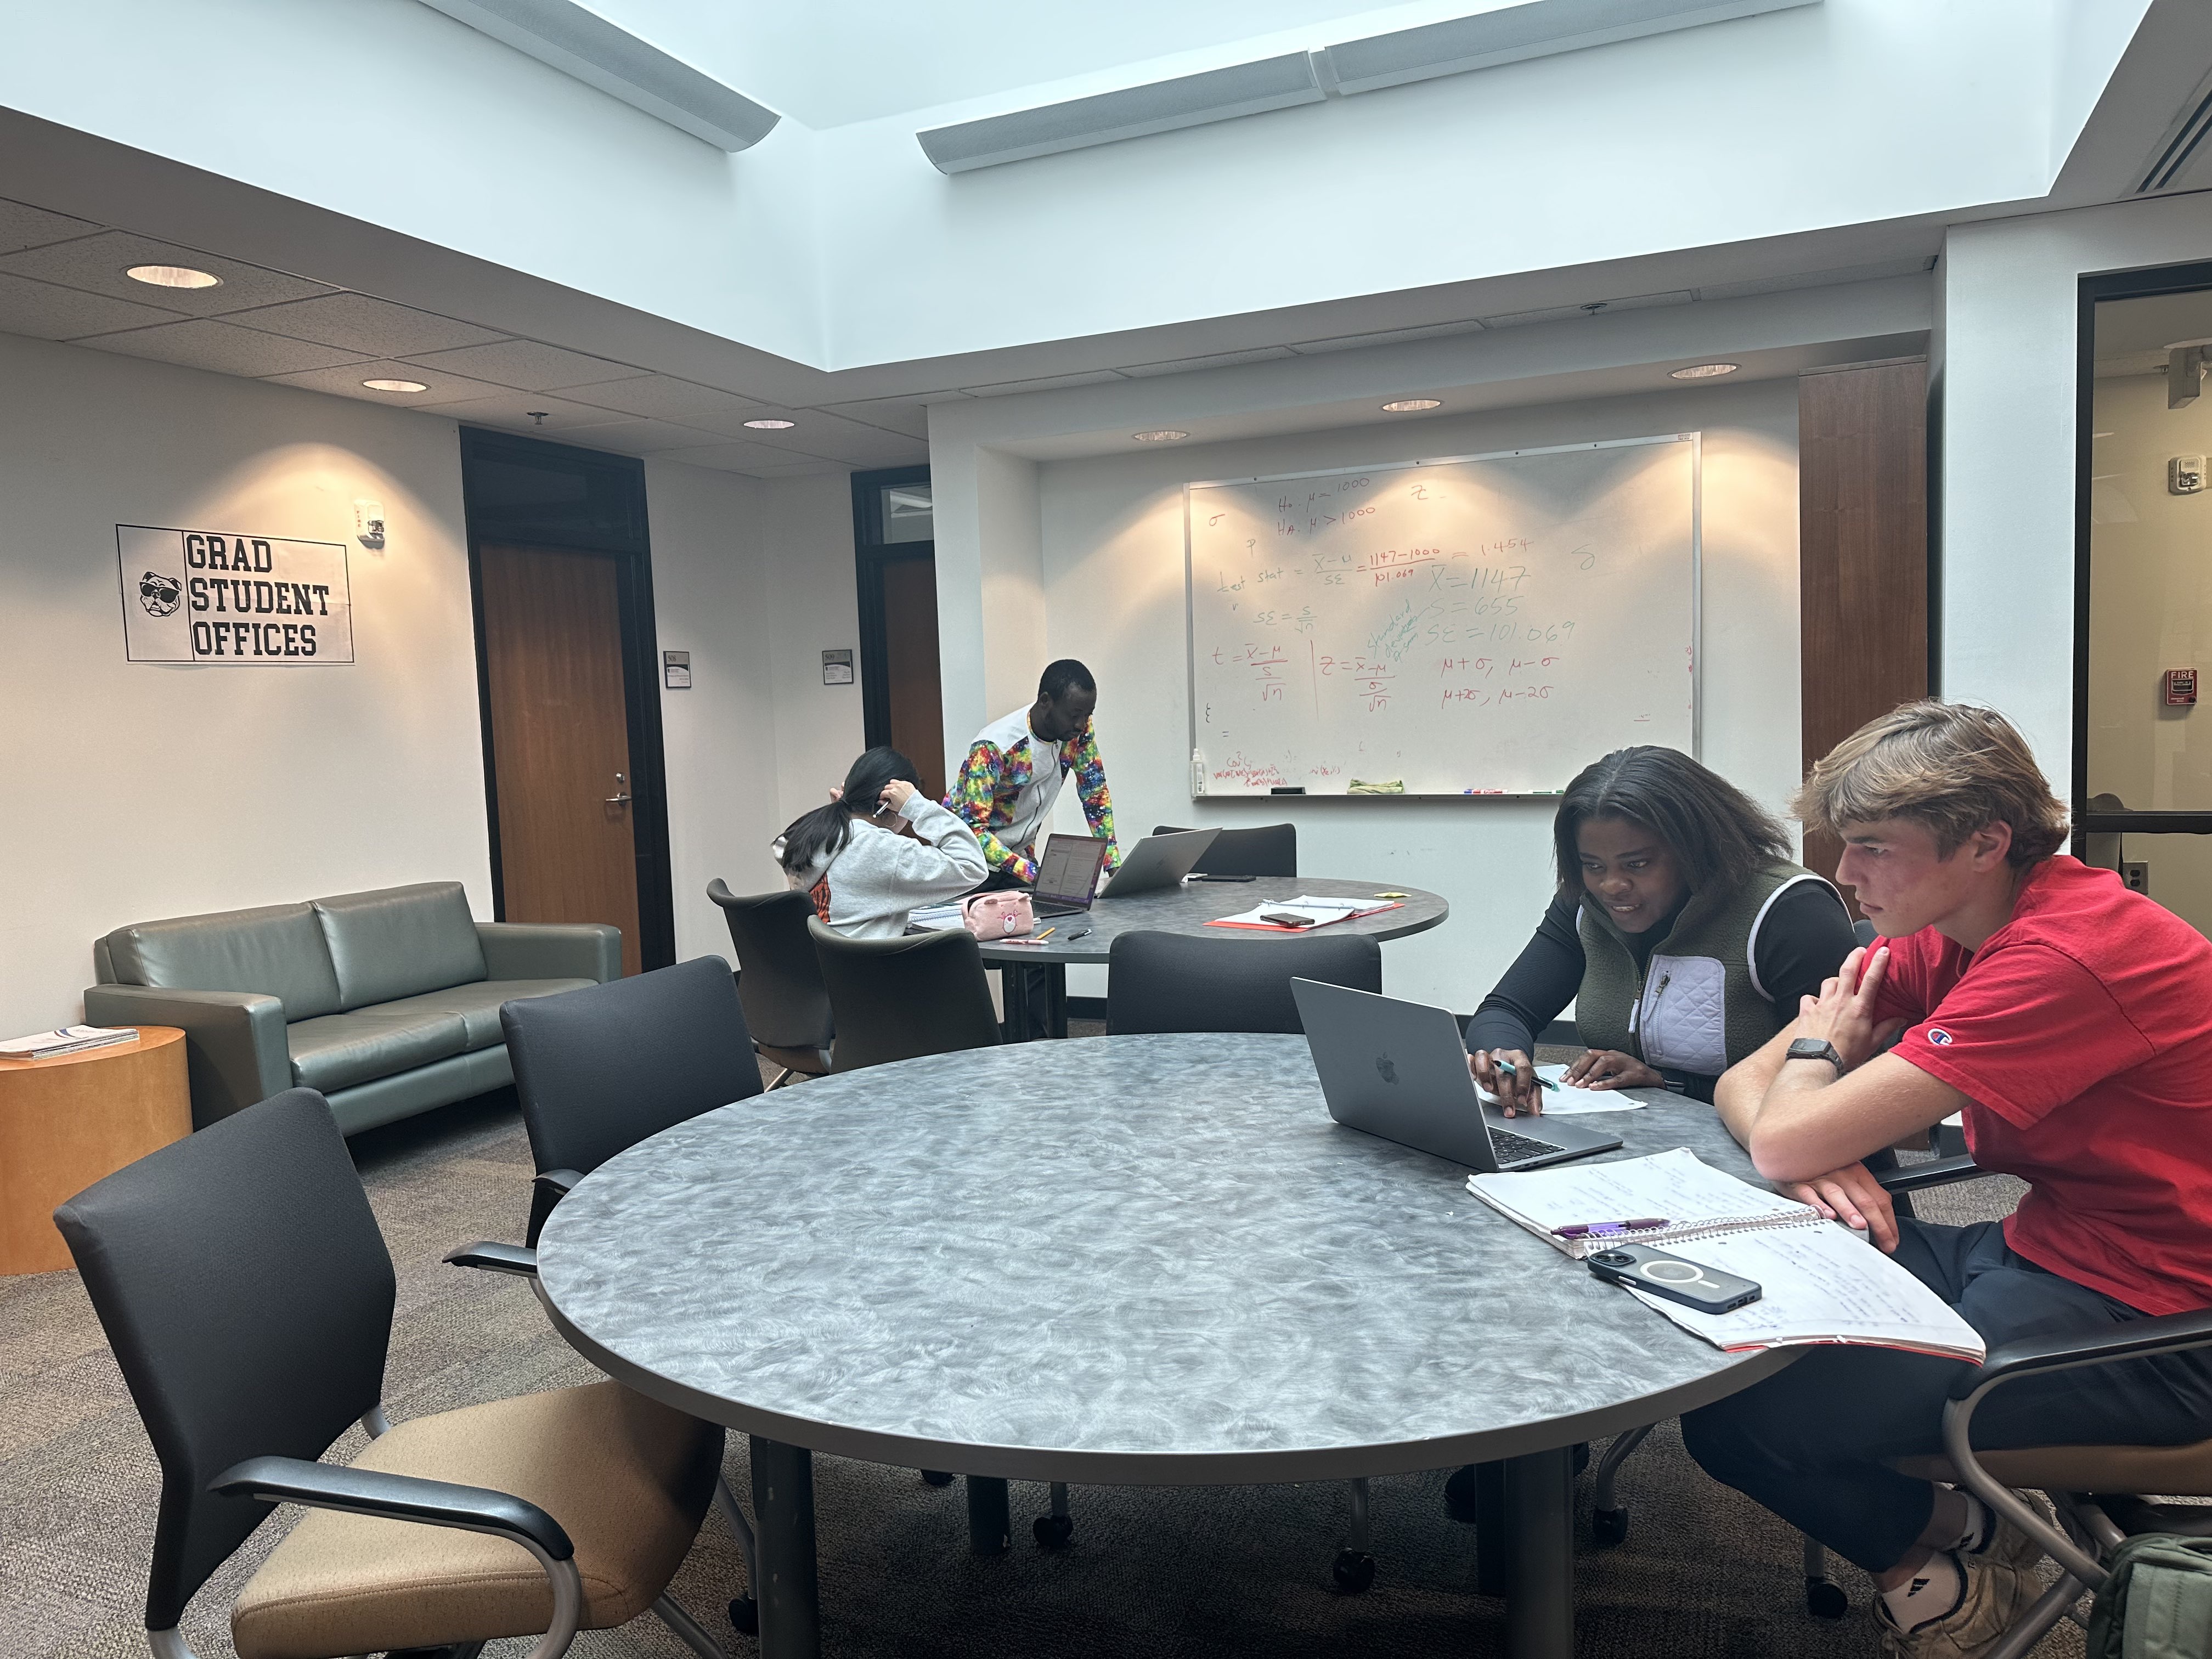 Grad Students having Office Hours in their connect space